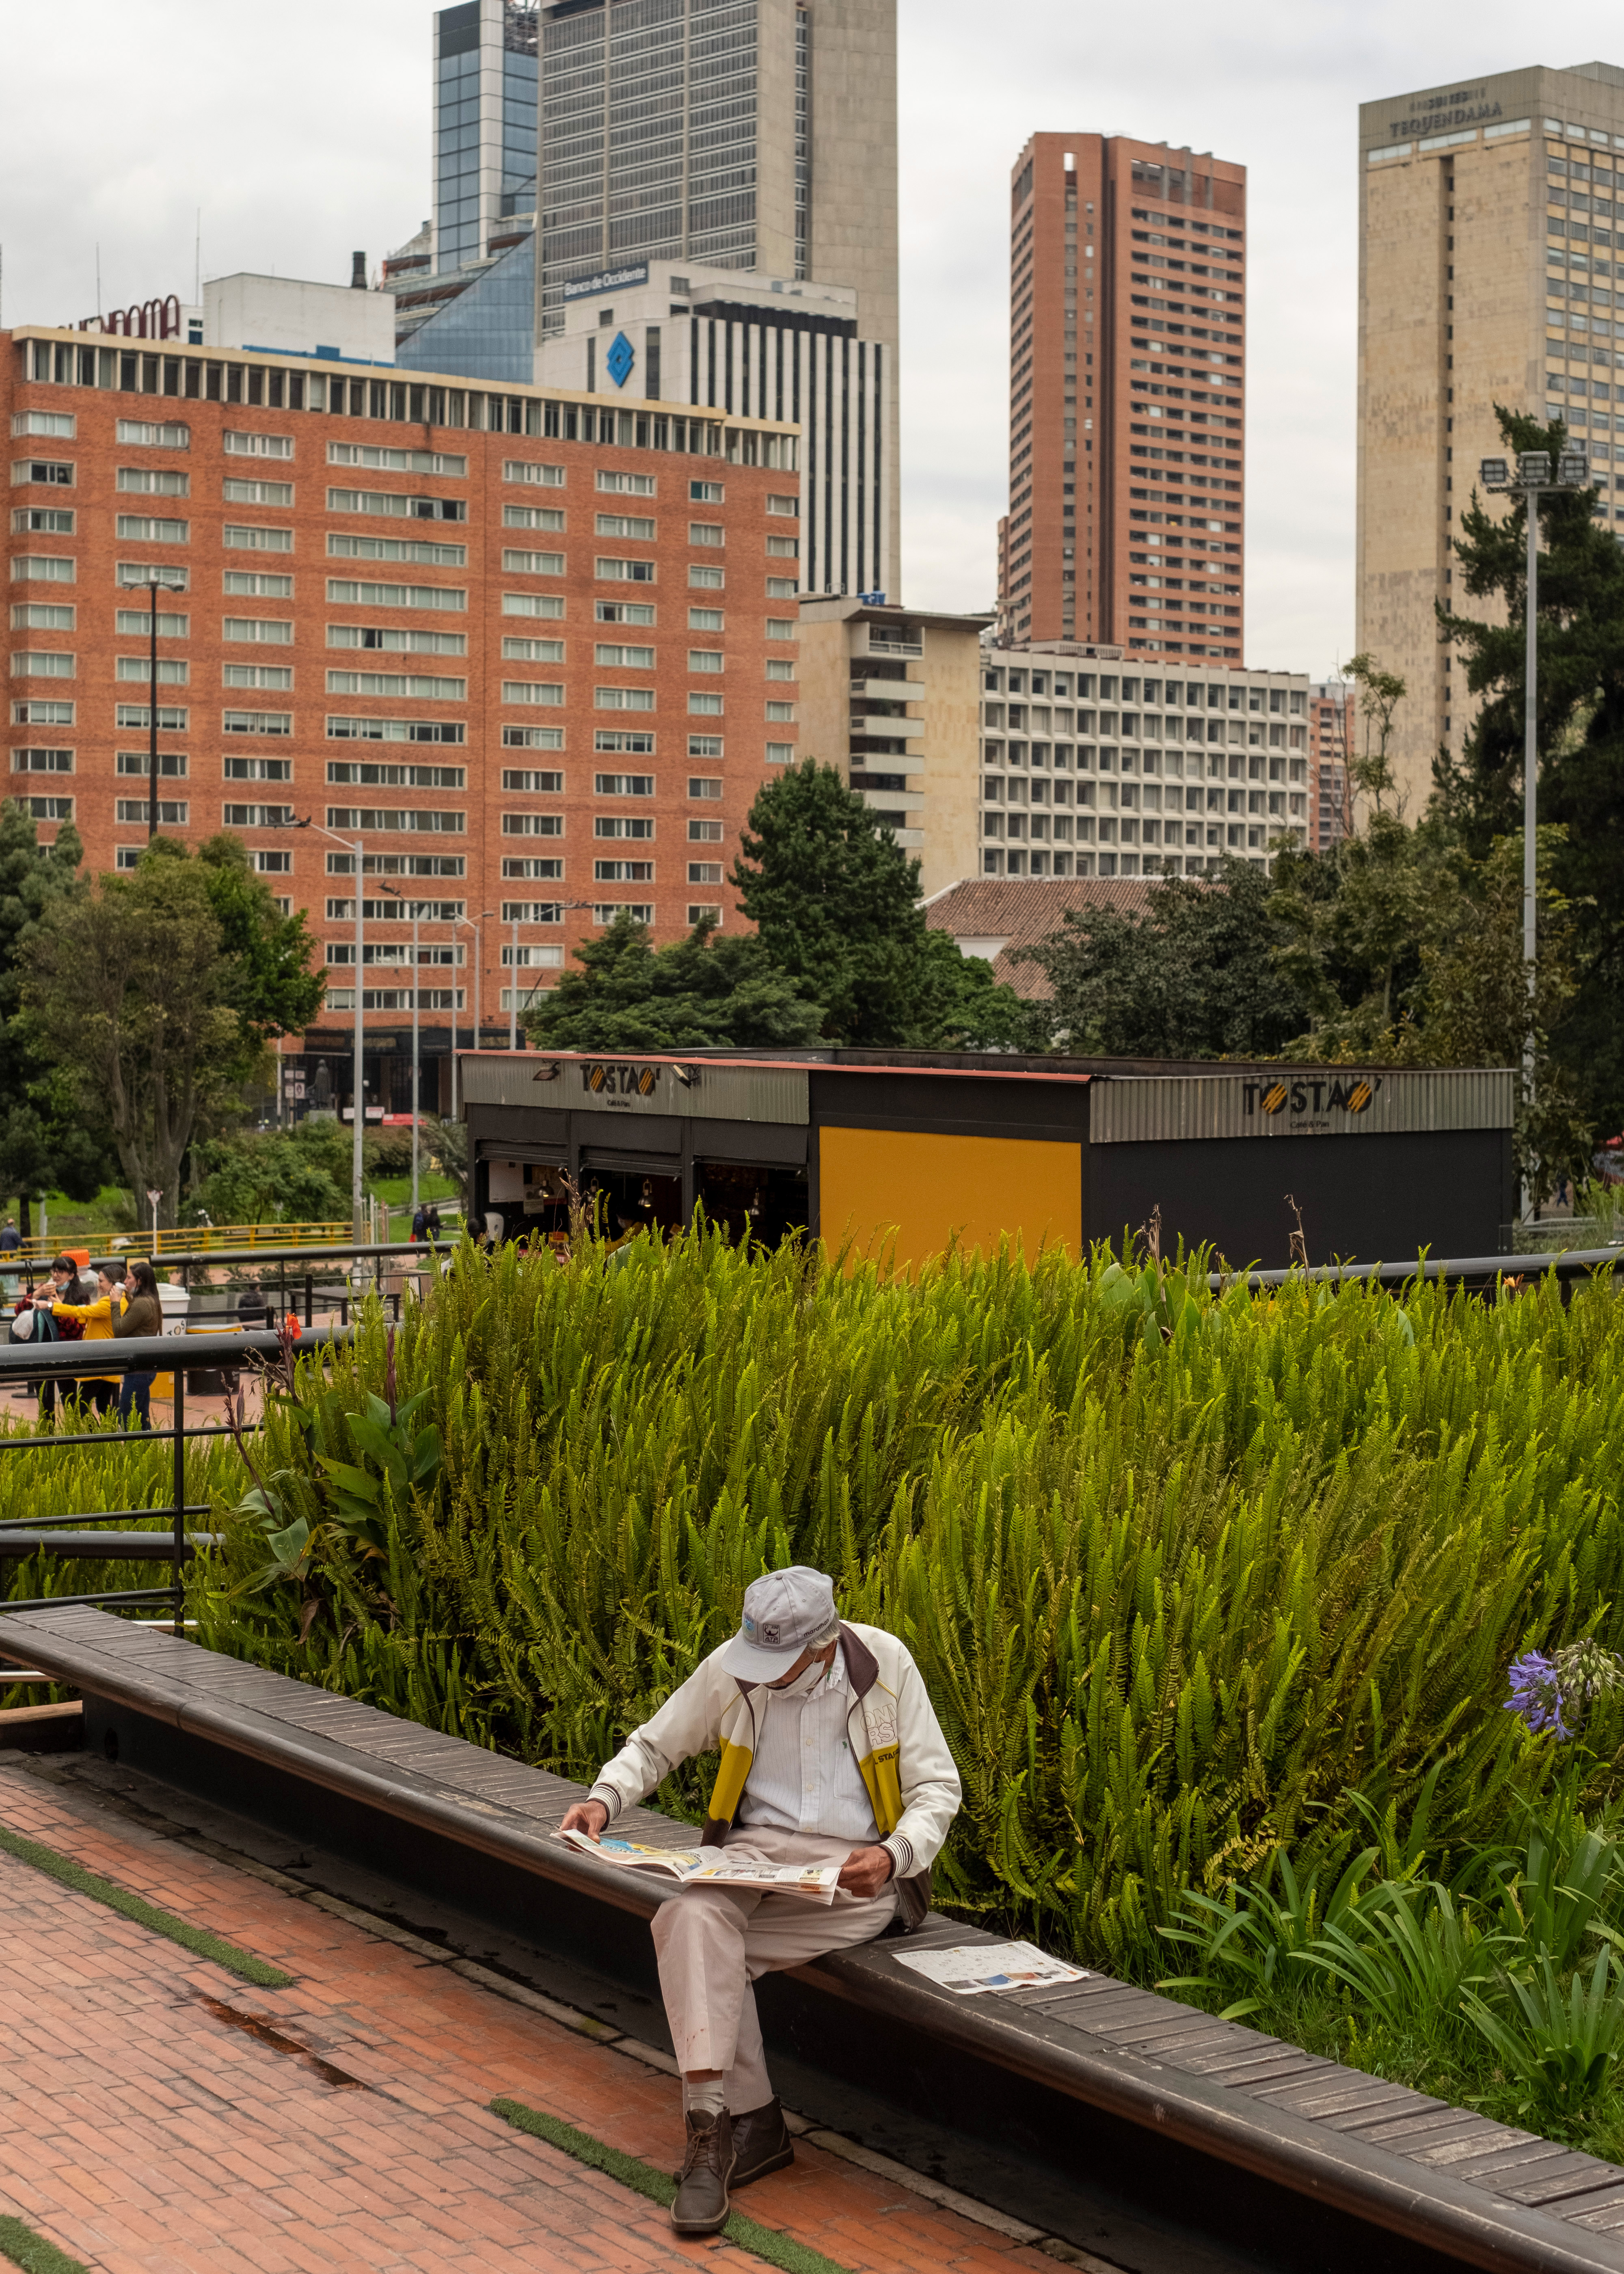 A well-manicured park in the Centro Internacional, one of Bogotá’s most important business centers.